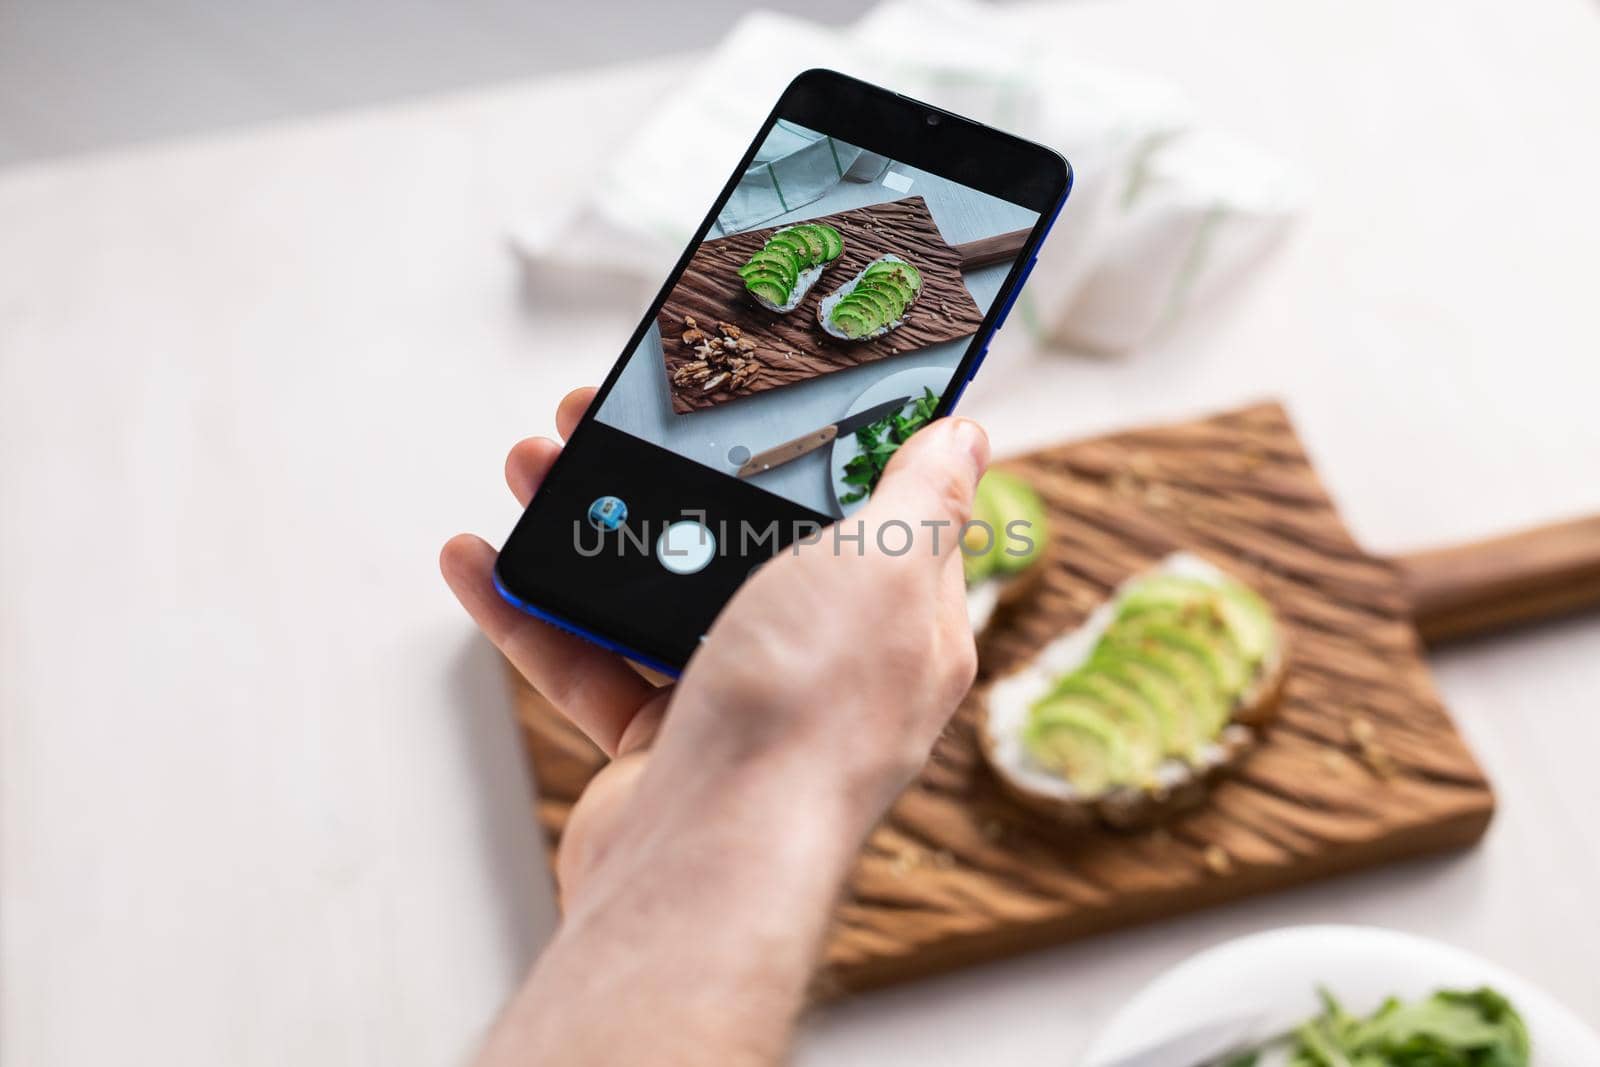 Hands take pictures on smartphone of two beautiful healthy sour cream and avocado sandwiches lying on board on the table. Social media and food concept by Satura86